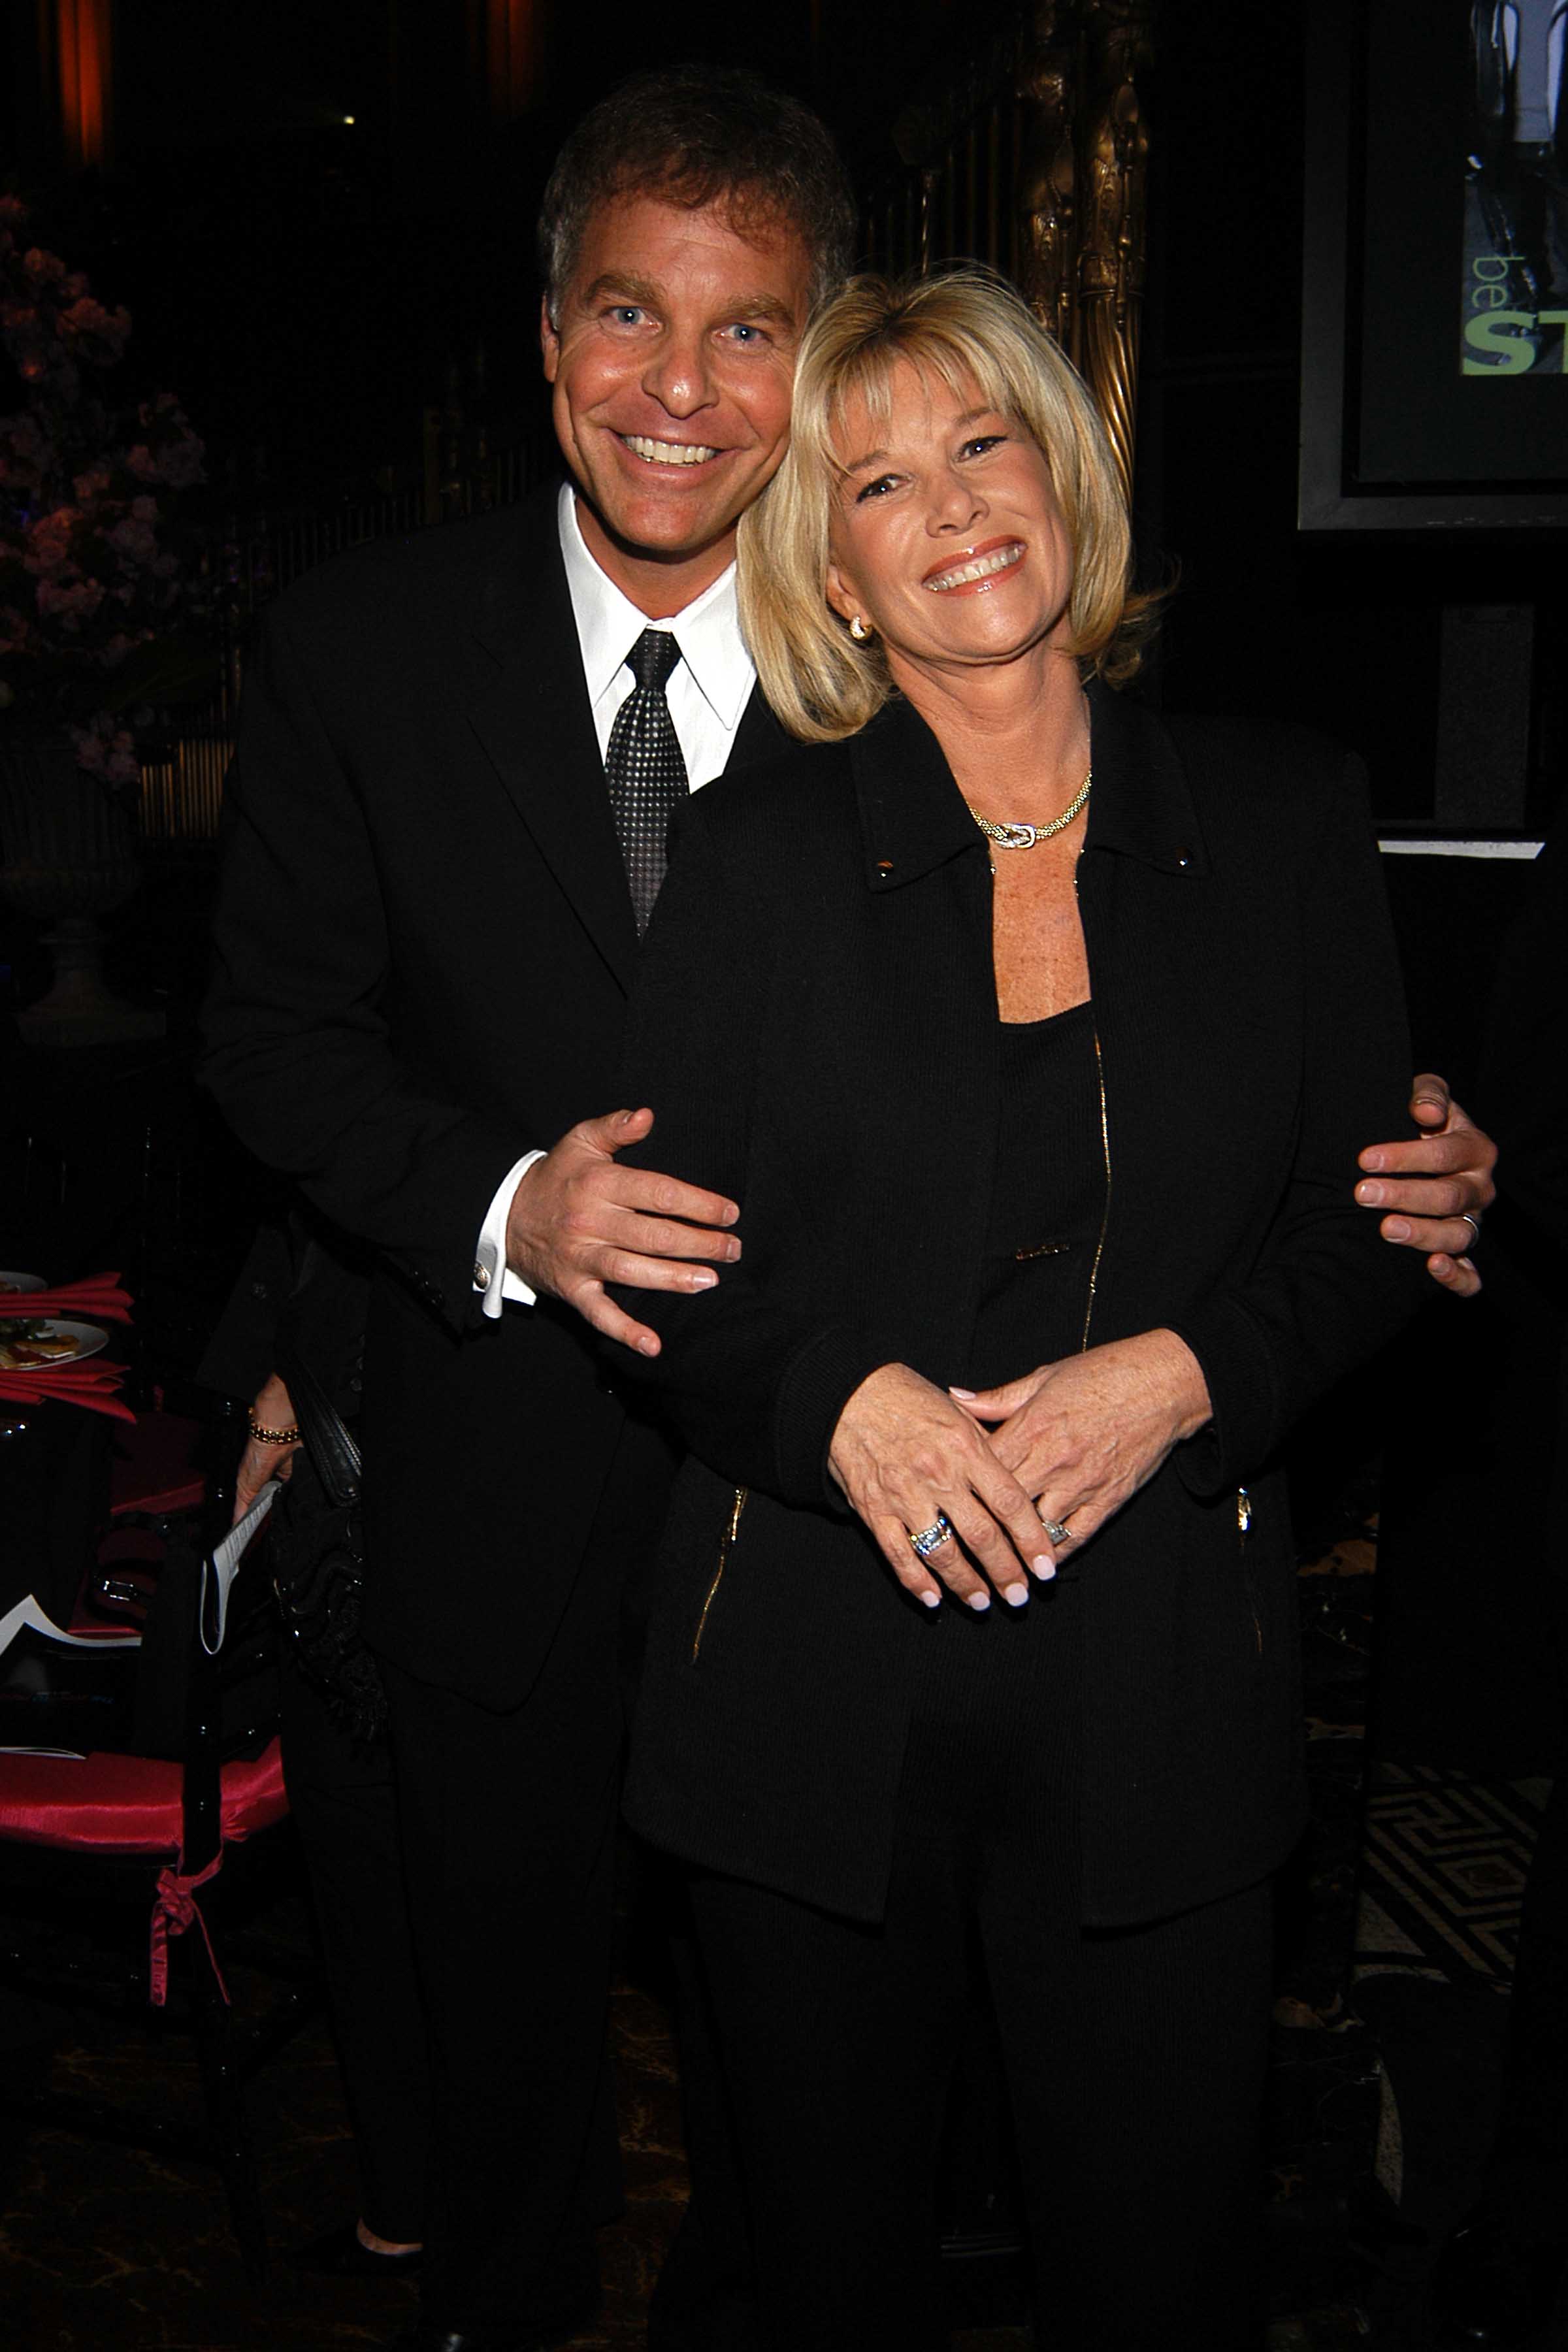 Jeff Konigsberg and Joan Lunden attend The Event To Prevent, A Benefit for The Candie's Foundation for the Prevention of Teenage Pregnancy at Gotham Hall in New York City on May 3, 2005. | Source: Getty Images